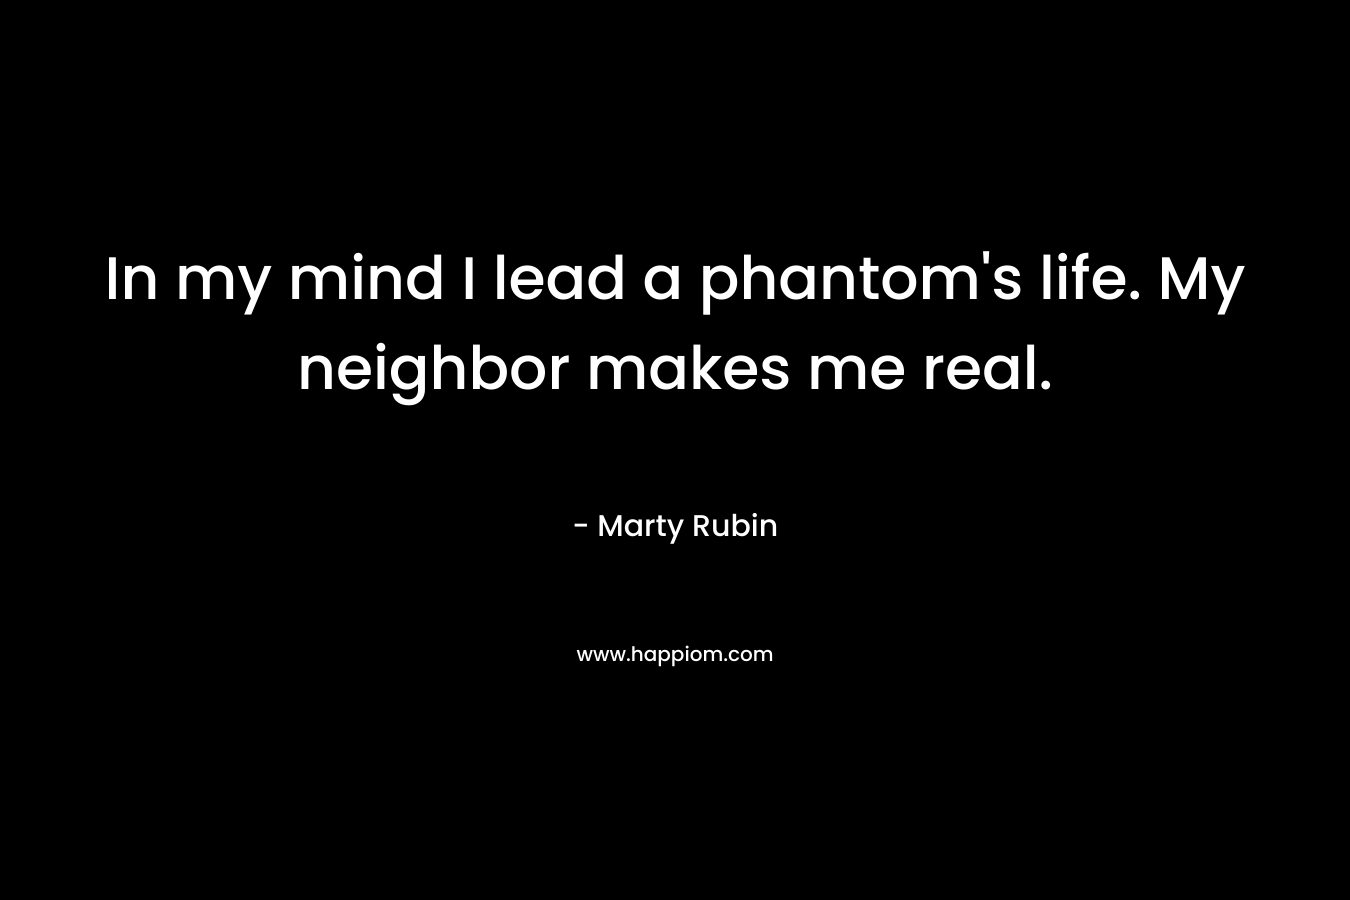 In my mind I lead a phantom's life. My neighbor makes me real.